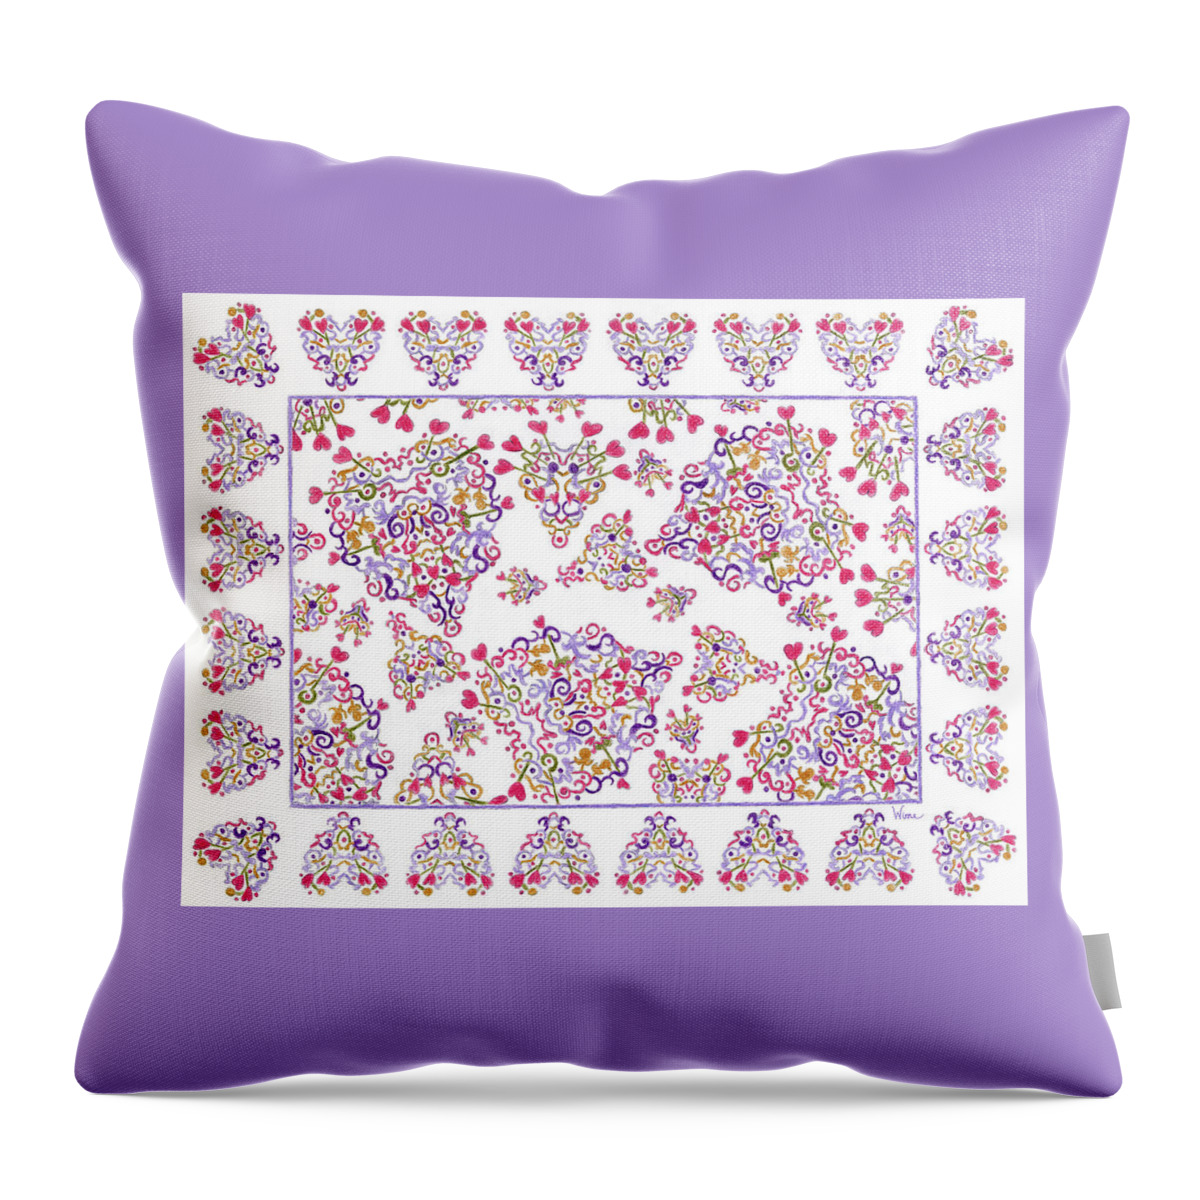 Lise Winne Throw Pillow featuring the drawing Floating Hearts with Border by Lise Winne